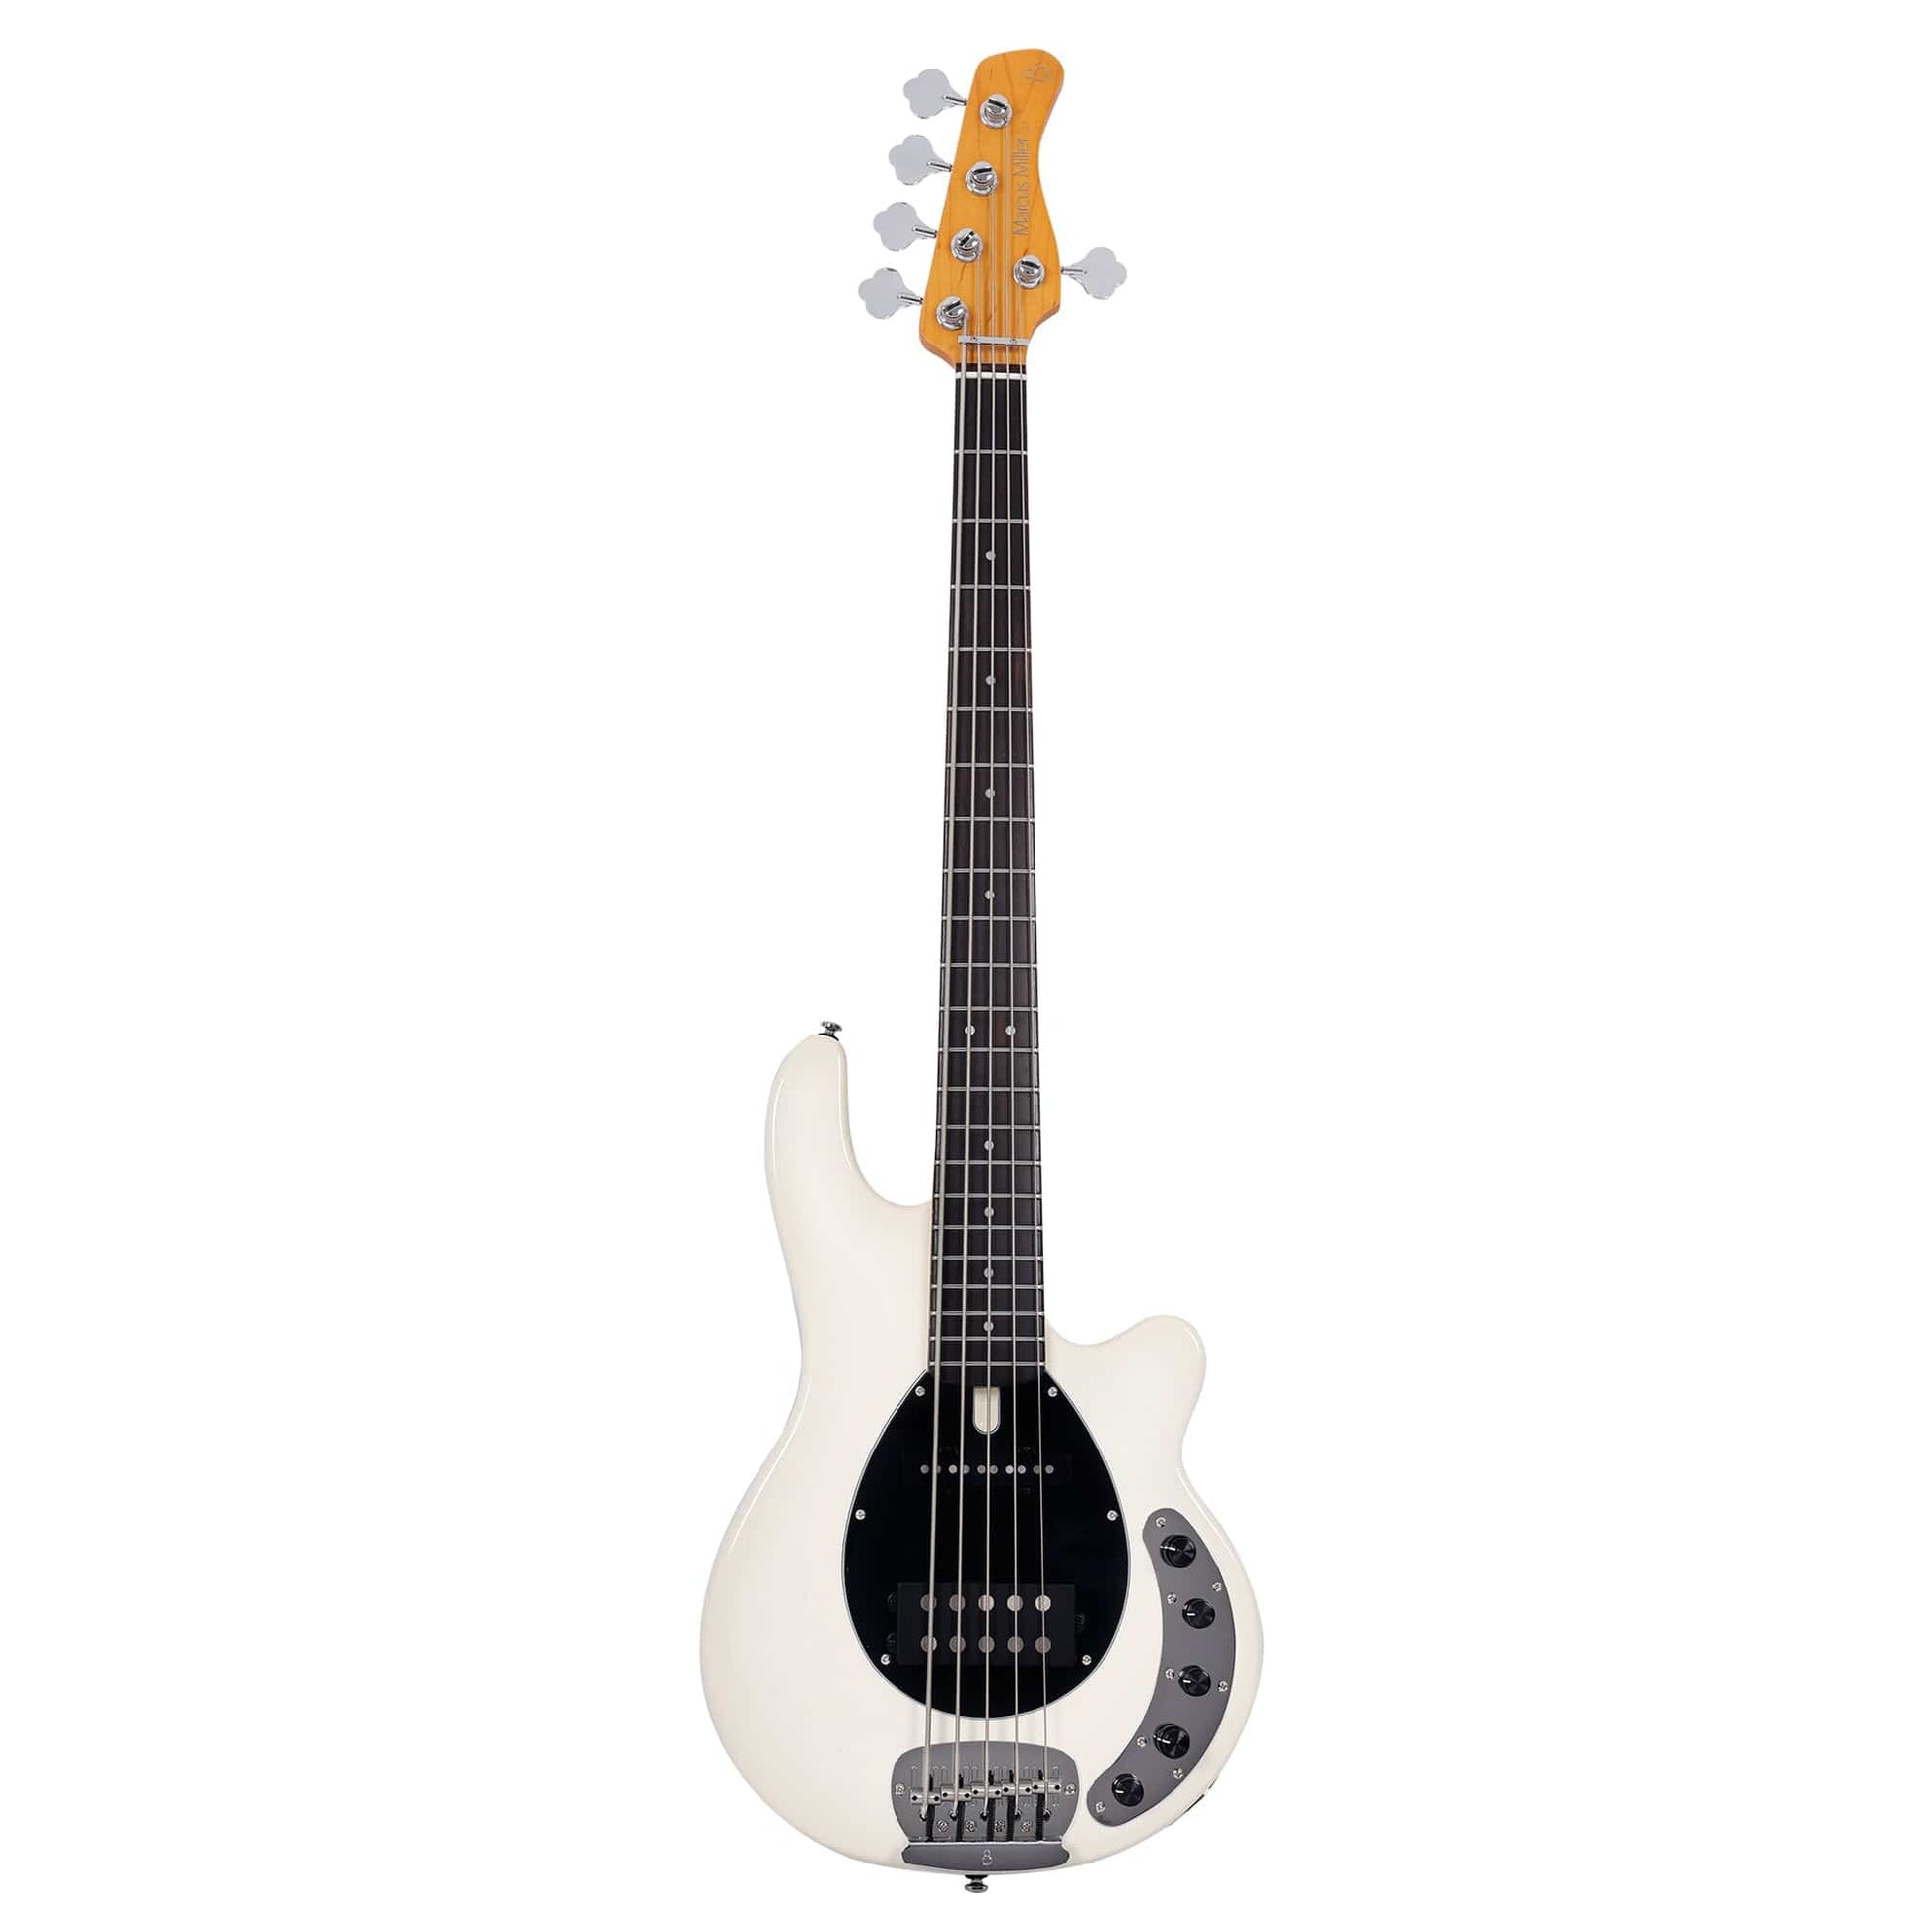 Sire Marcus Miller Z7 5-String Antique White Bass Guitars / 5-String or More